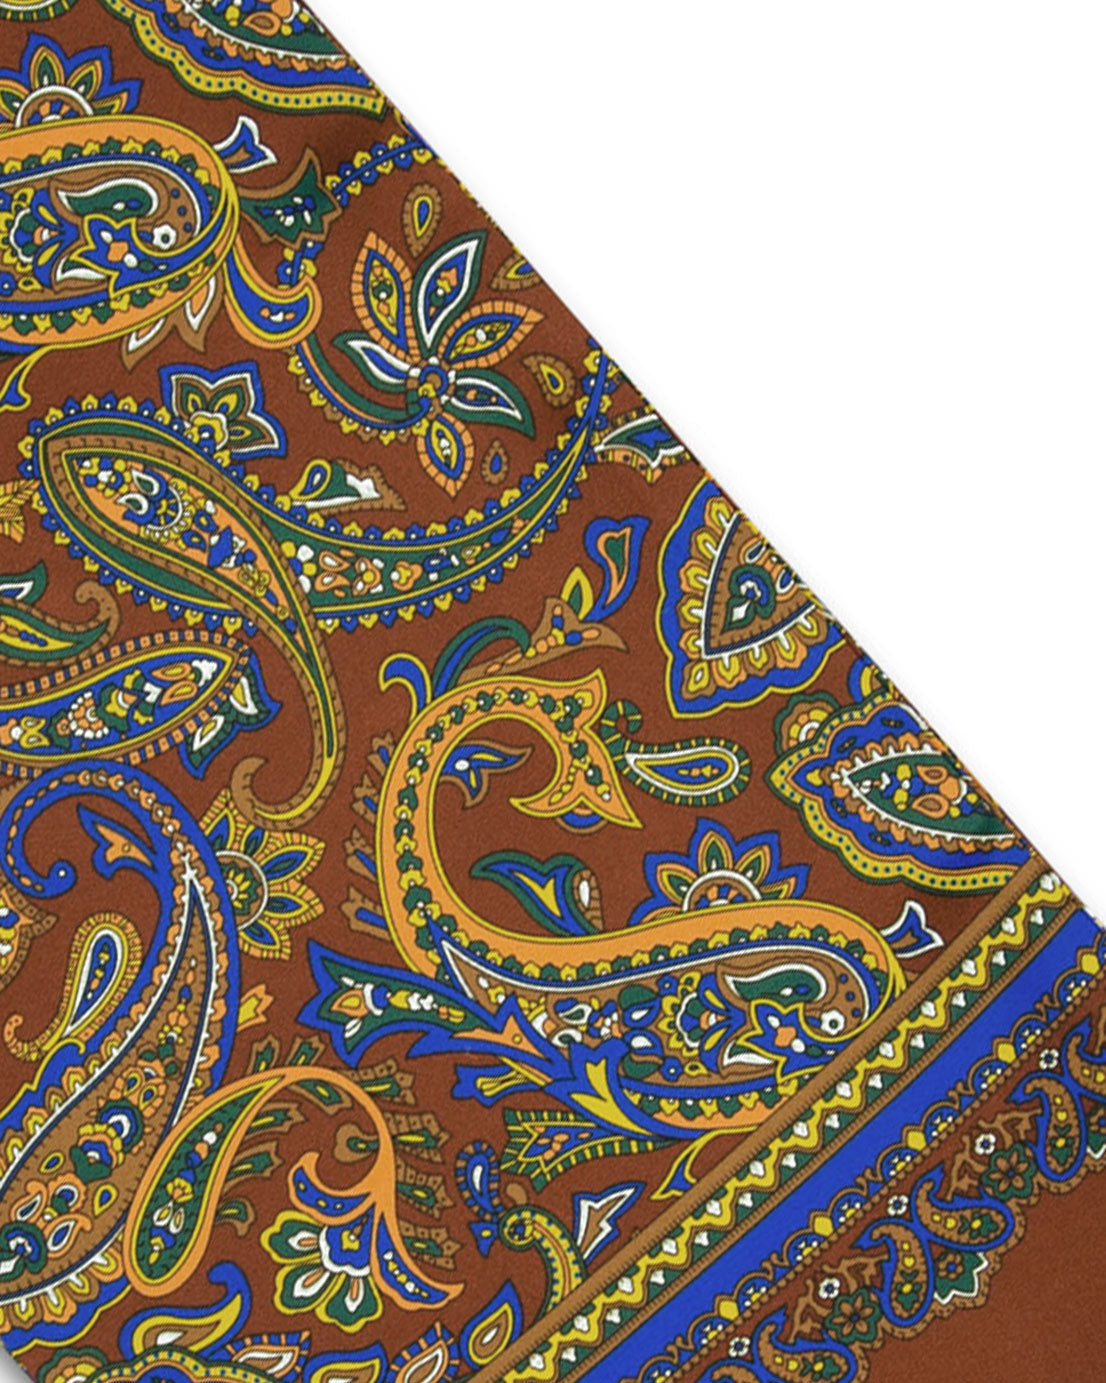 Angled view of the patterned polyester scarf, presenting a closer view of the decorative and floral-inspired patterns on a rich brown background.